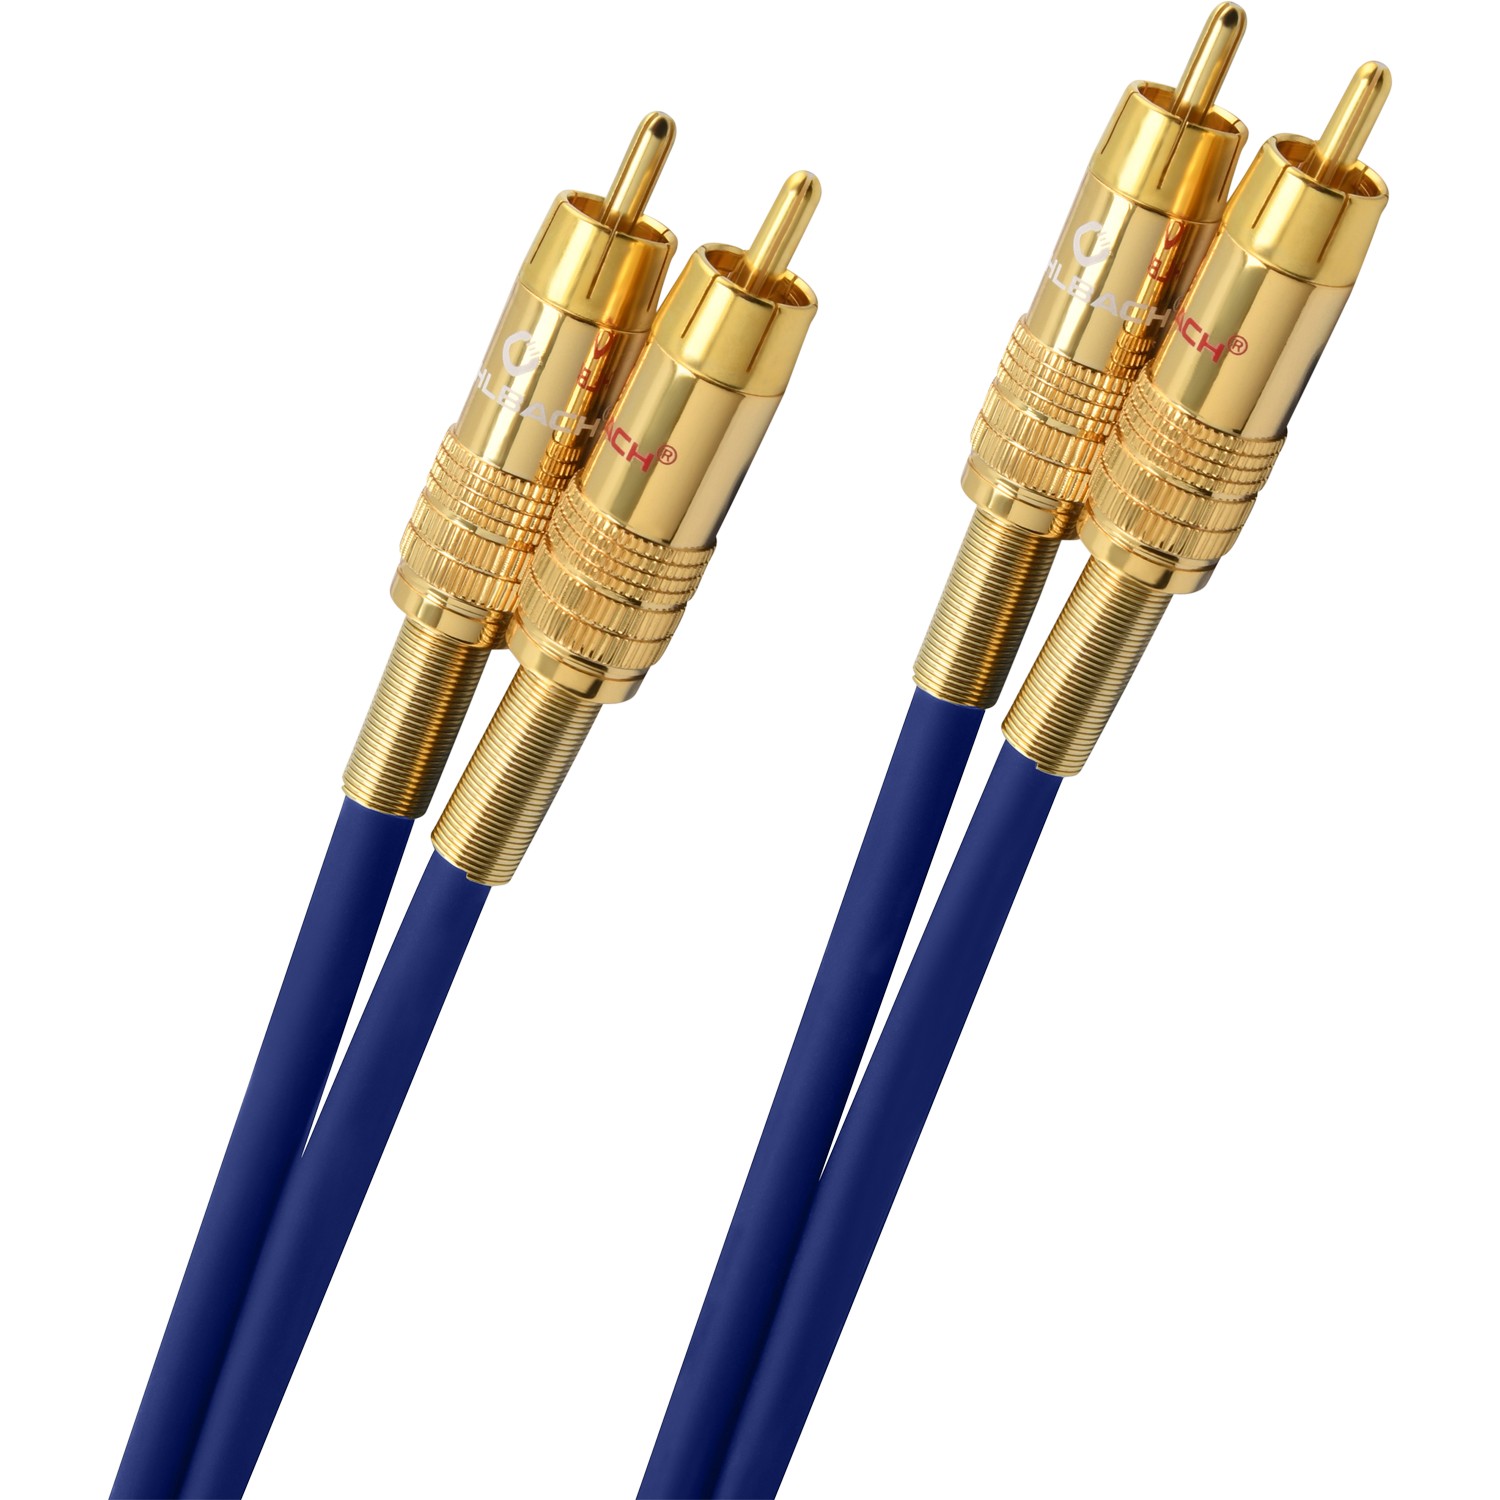 Кабели межблочные аудио Oehlbach PERFORMANCE NF 1 Master Set 1 x 10m, blue, D1C2039 кабели межблочные аудио oehlbach state of the art xxl cable rca 2x1 50m gold d1c13114